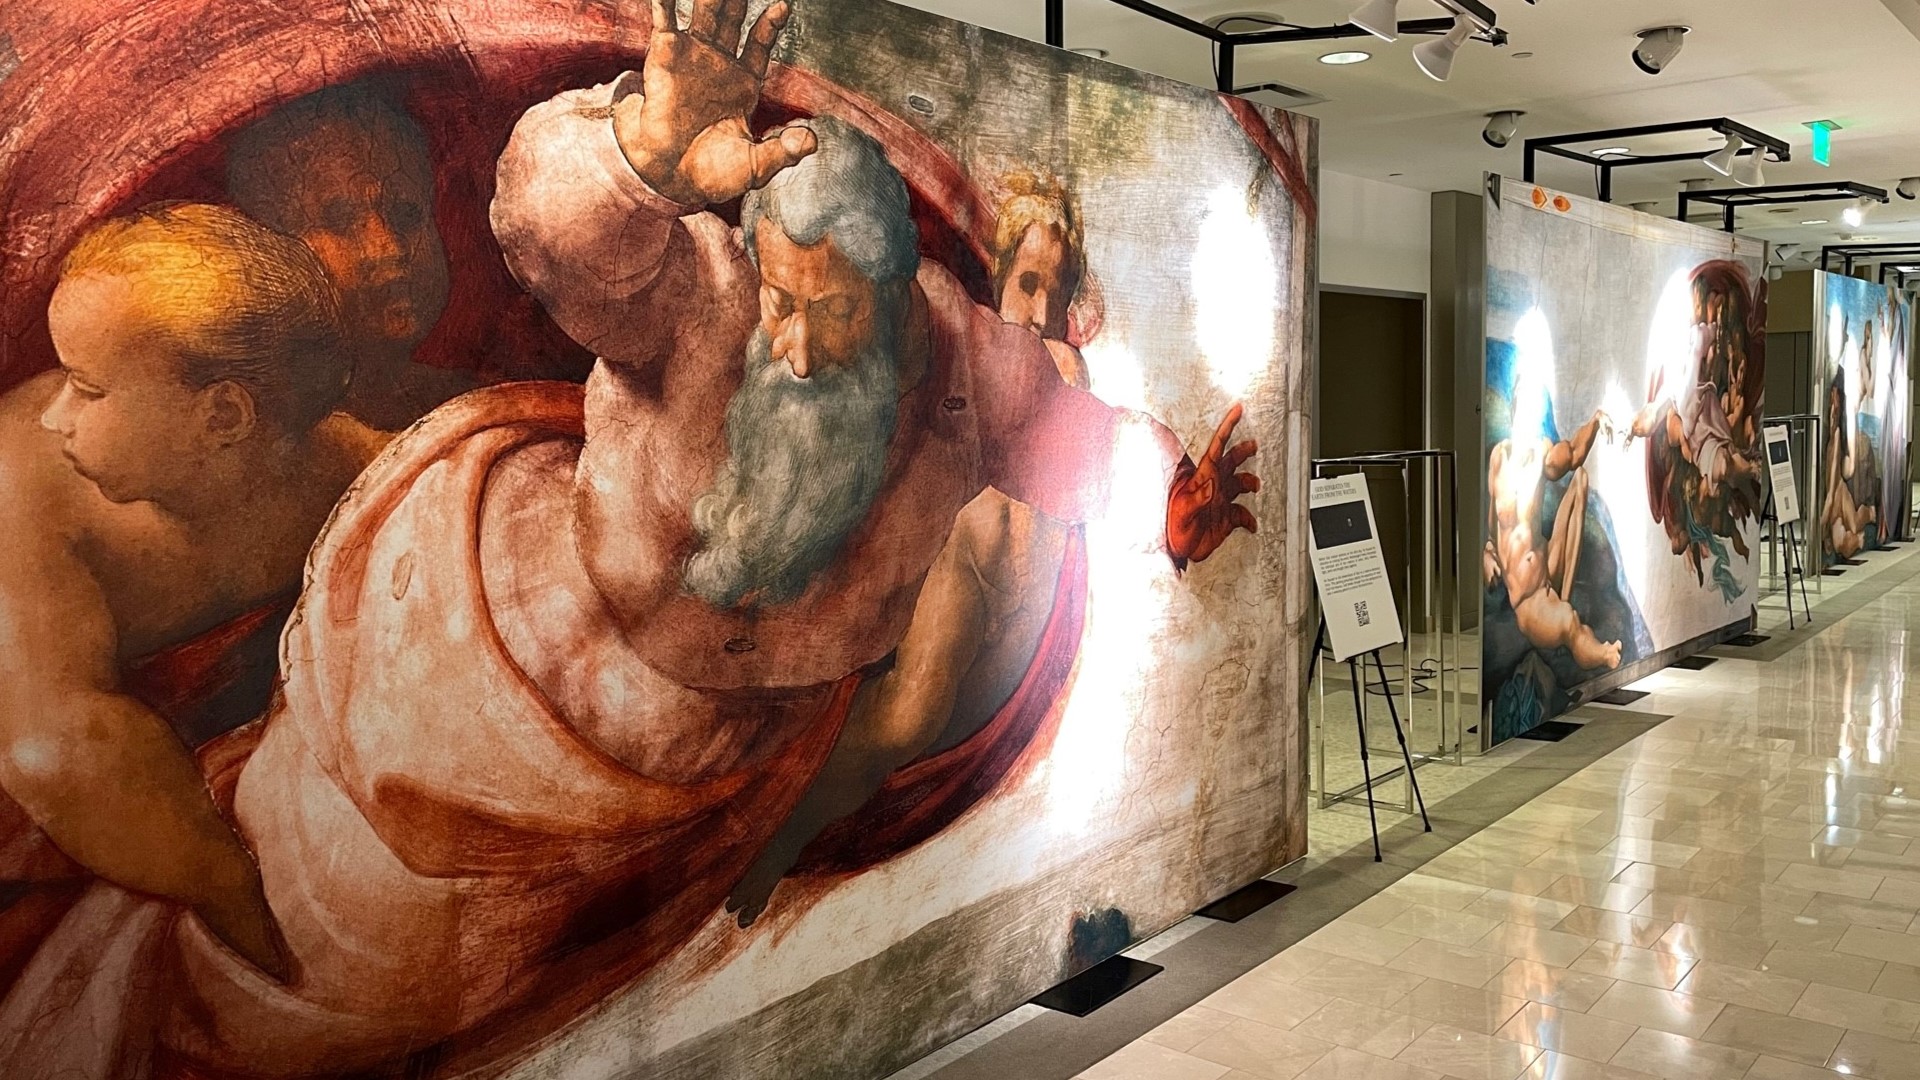 The exhibit is a collection of reproductions of the artist’s renowned ceiling frescoes from the Vatican’s Sistine Chapel. #k5evening